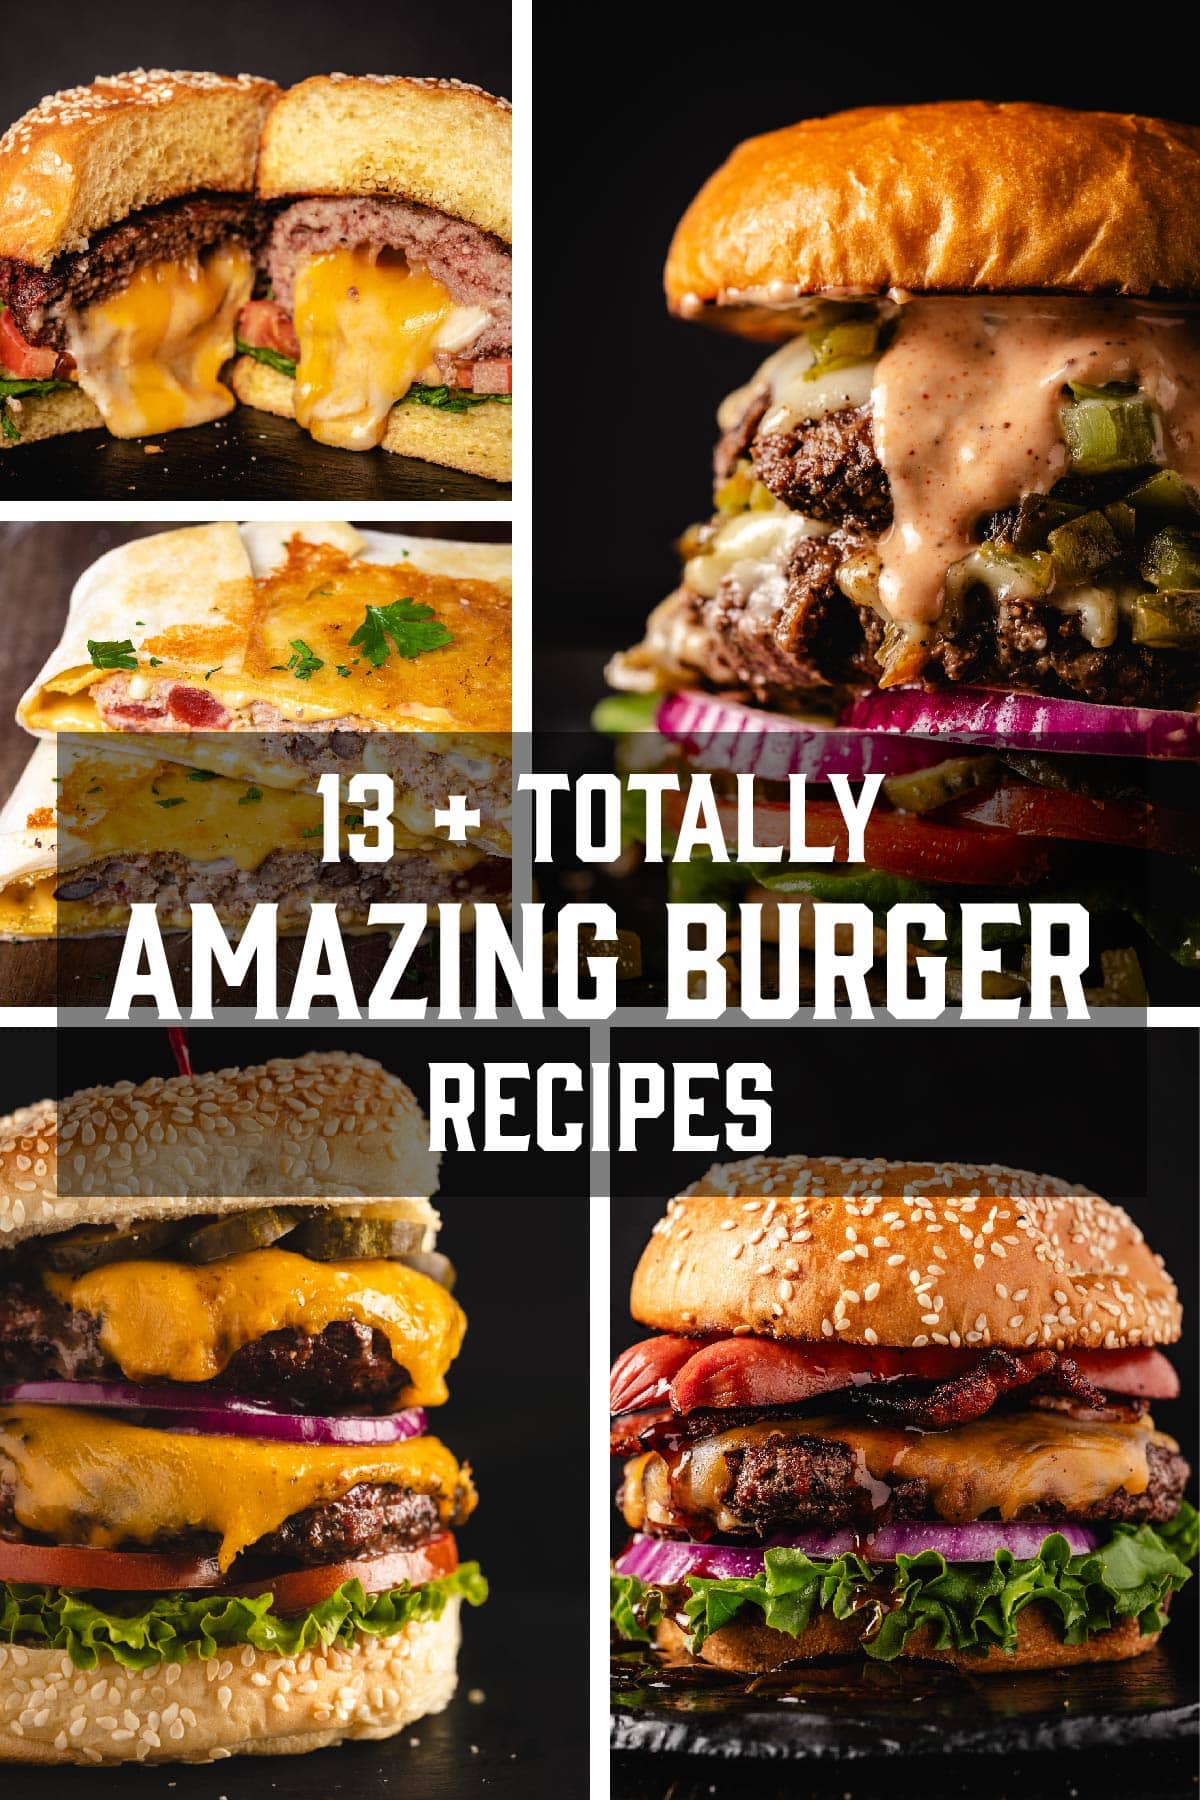 Various cheeseburgers on black background. Text reads "13+ Totally Amazing Burger Recipes".